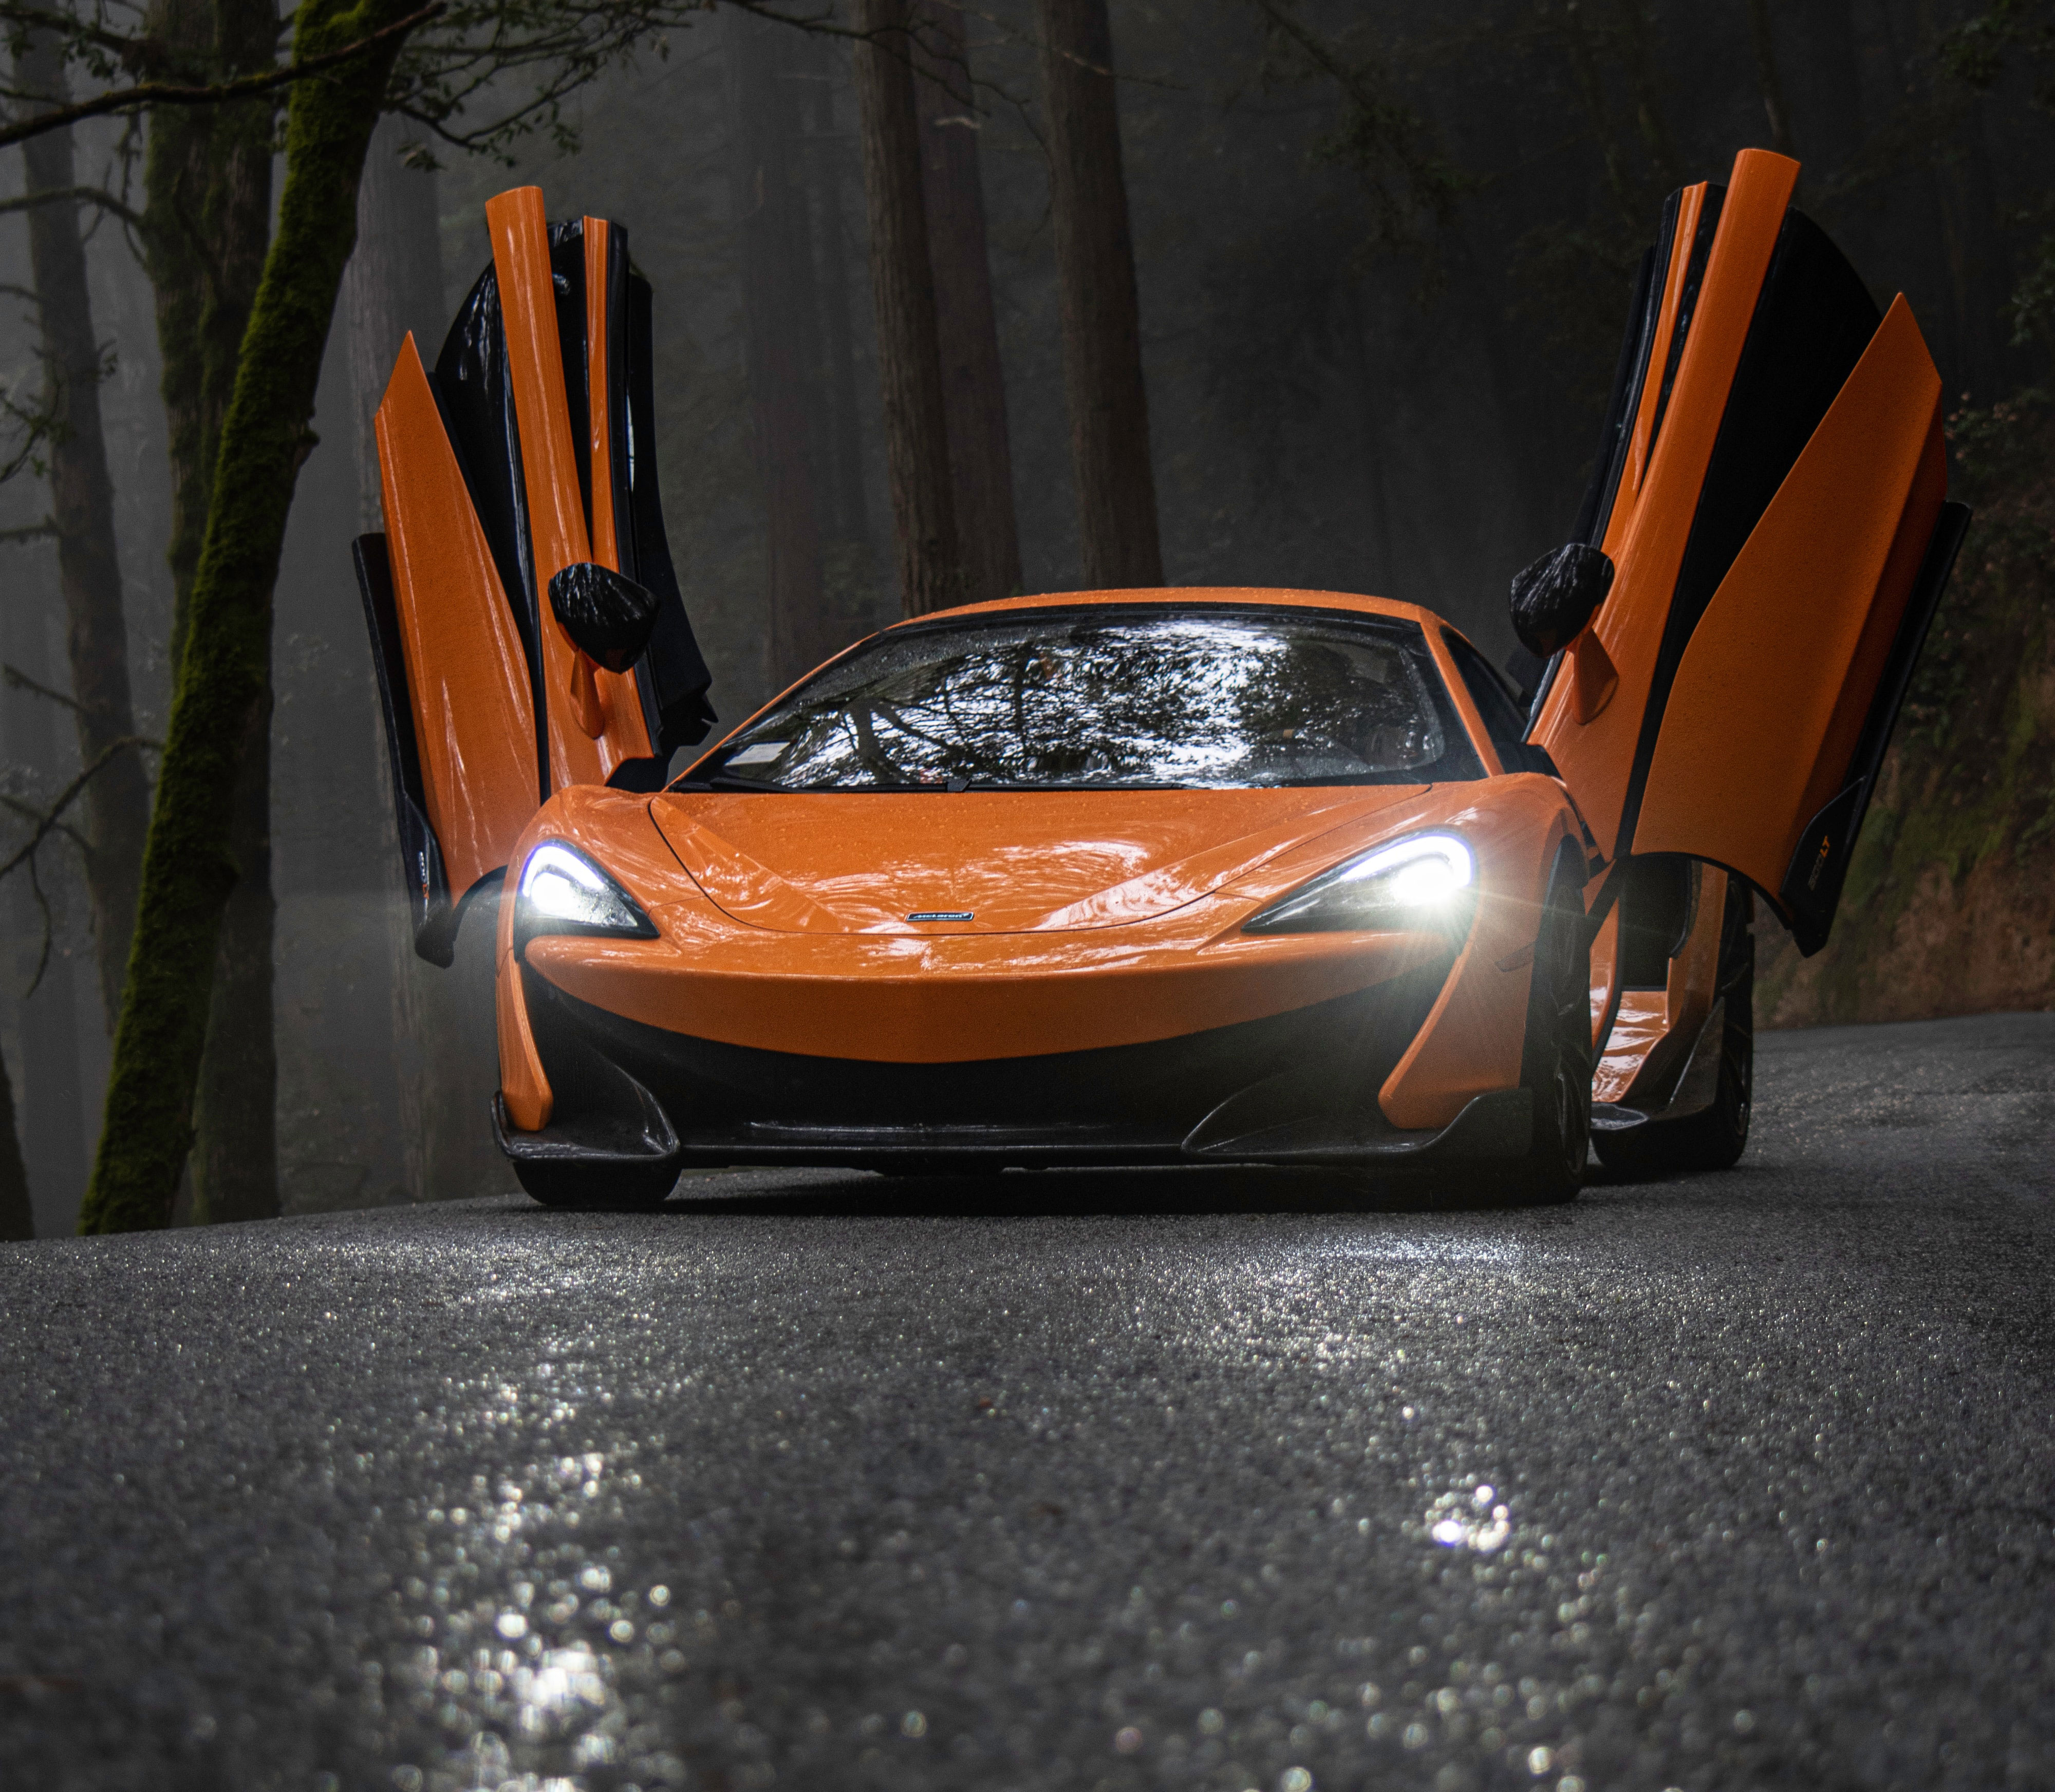 Orange Sports Car with Lights on and Car Doors Open to the Sky in a Dark Wooded Location.